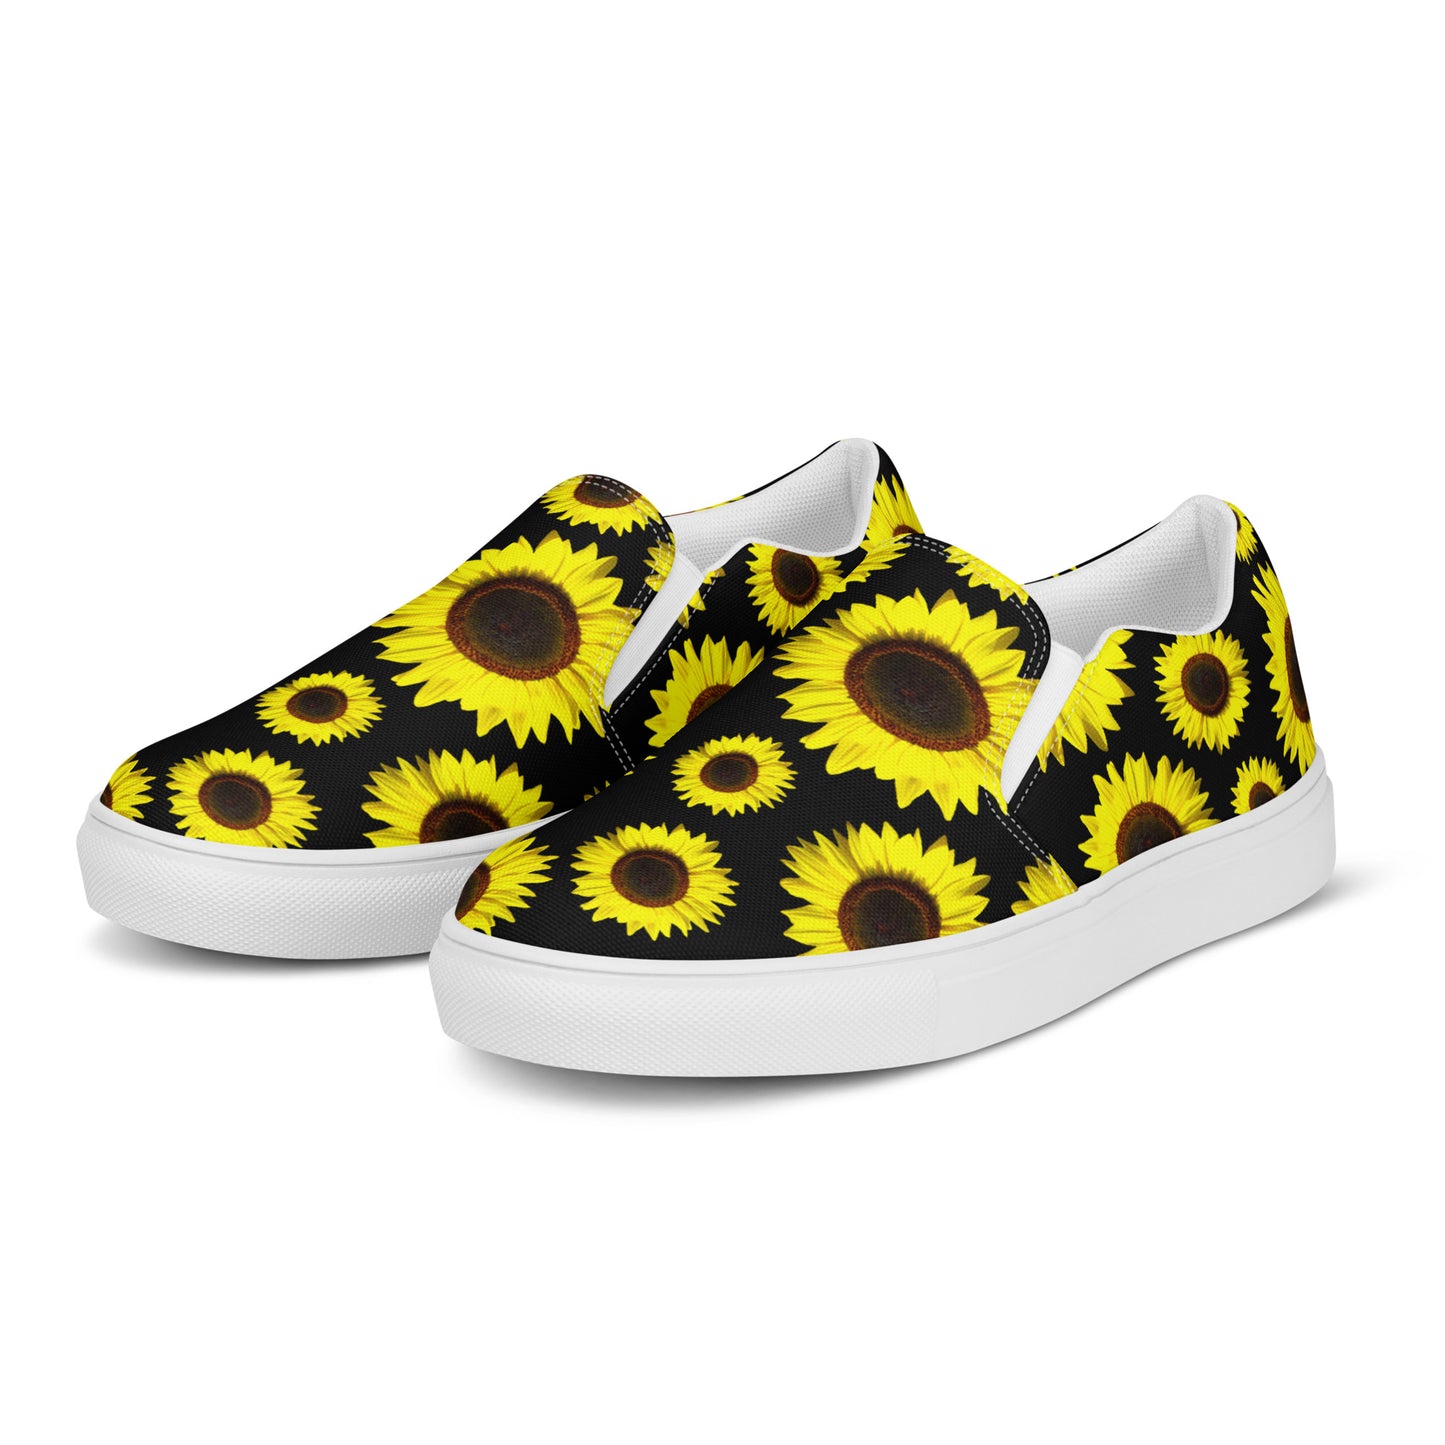 Women’s slip-on canvas shoes - Sunflowers